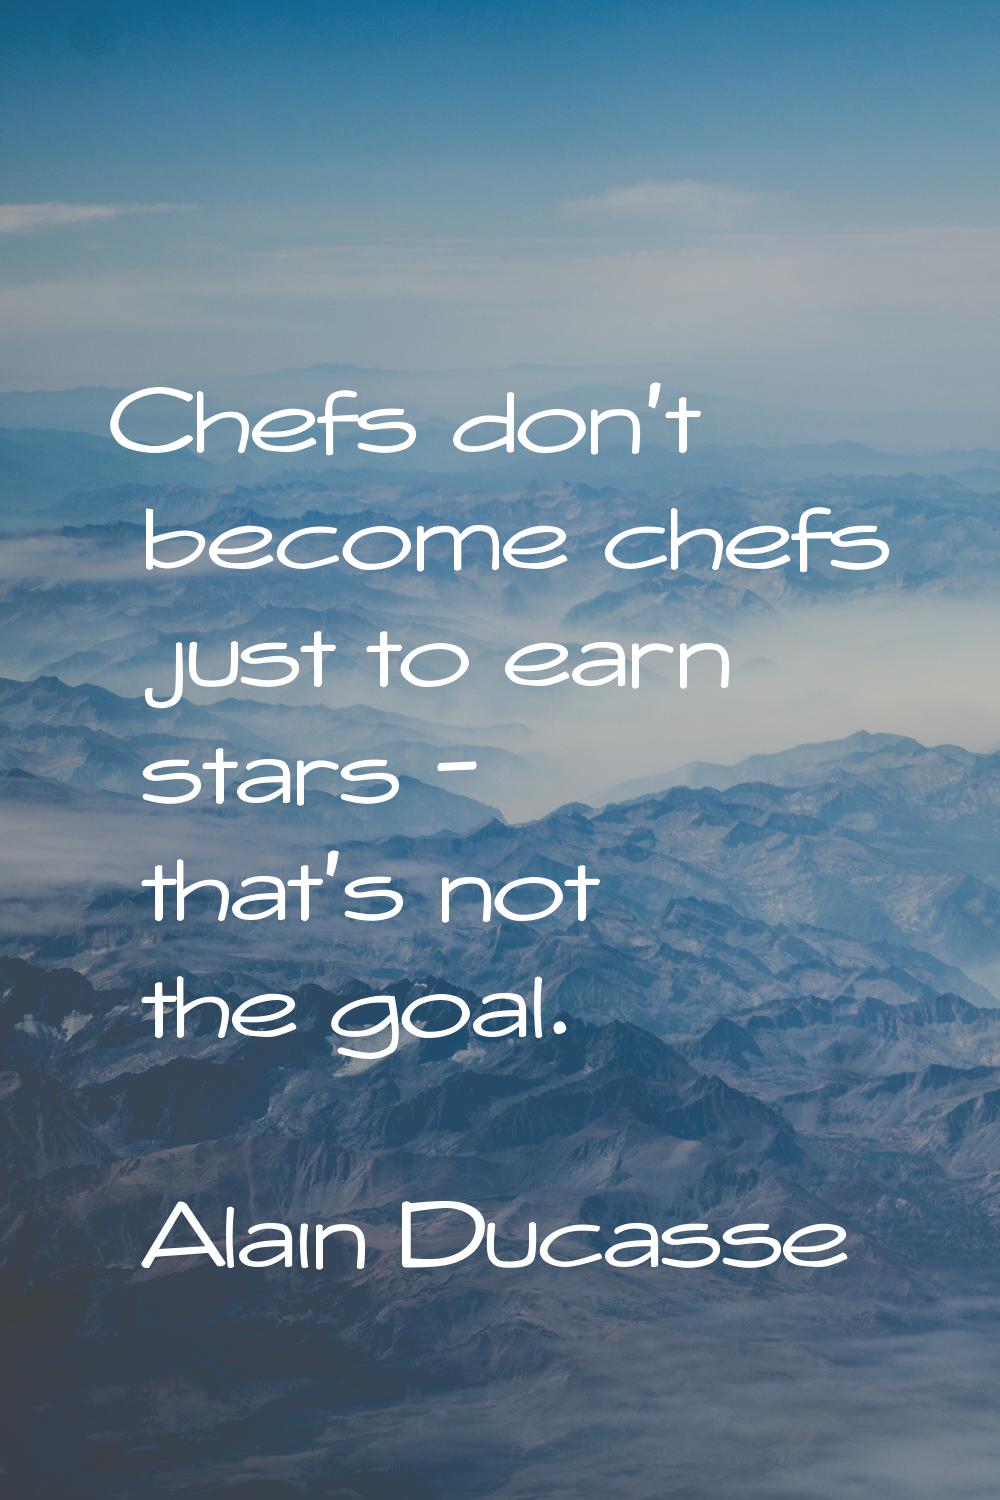 Chefs don't become chefs just to earn stars - that's not the goal.